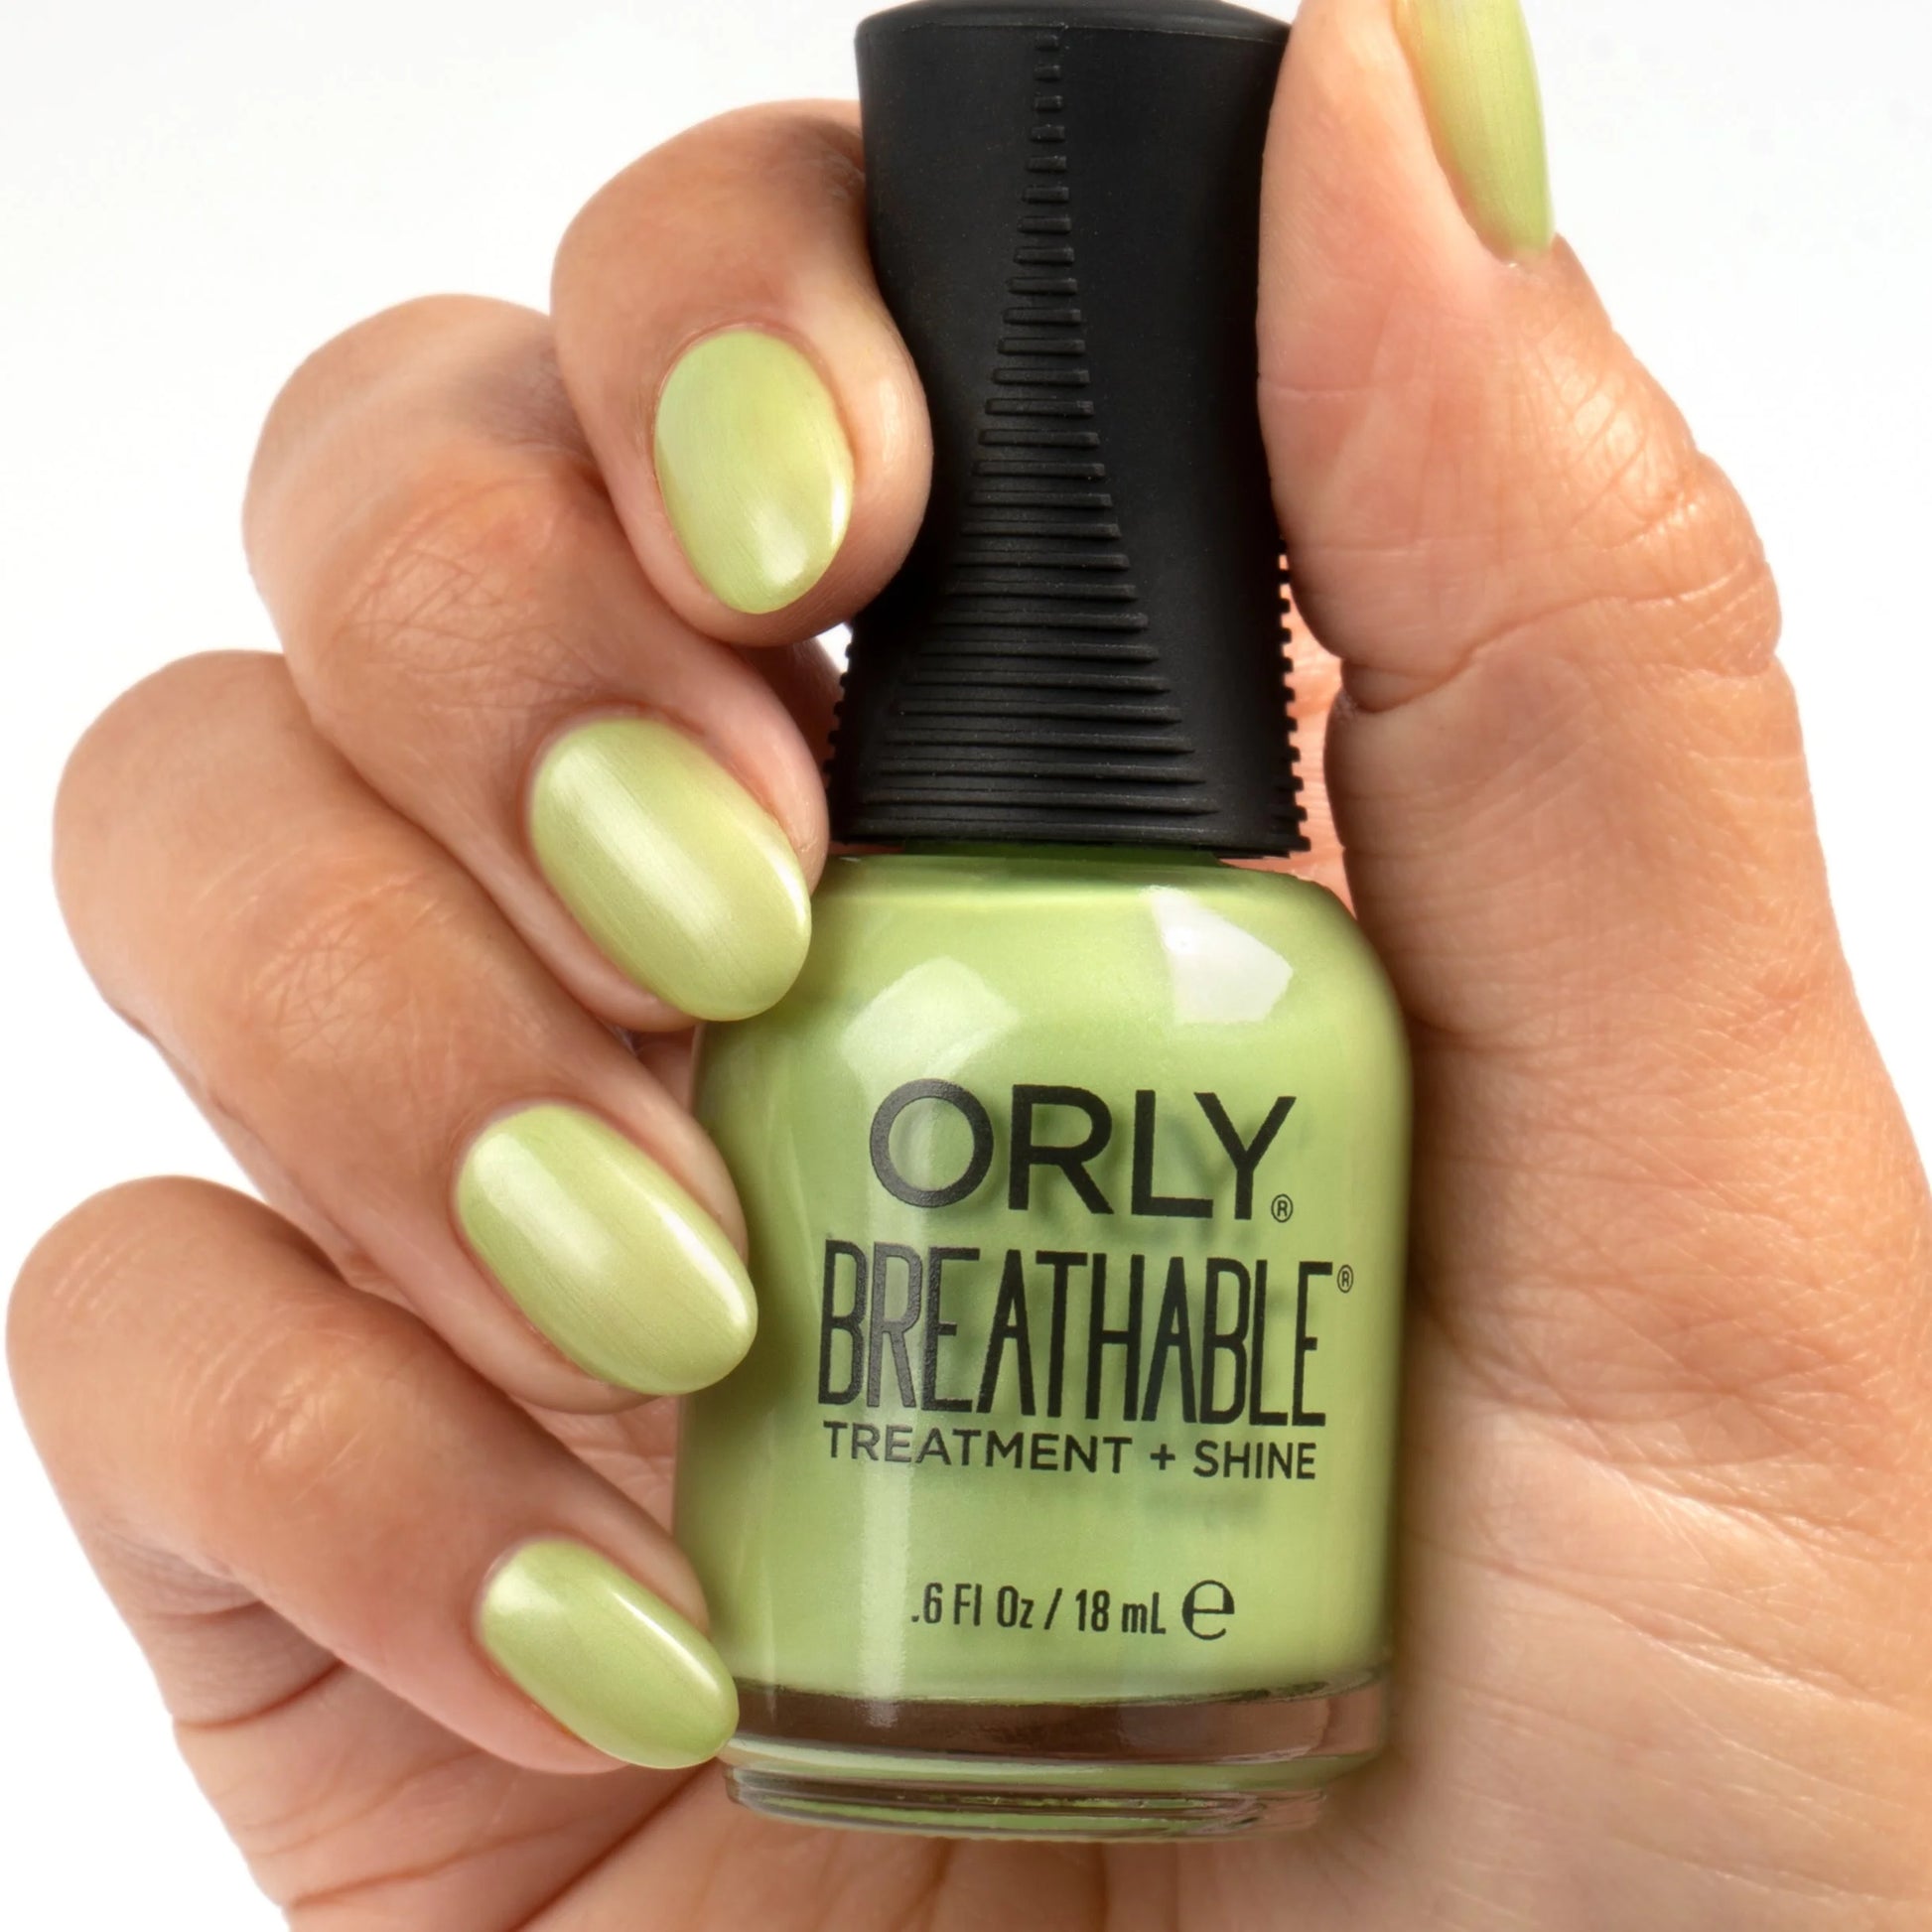 orly breathable nail polish, Simply The Zest 2060044 Classique Nails Beauty Supply Inc.